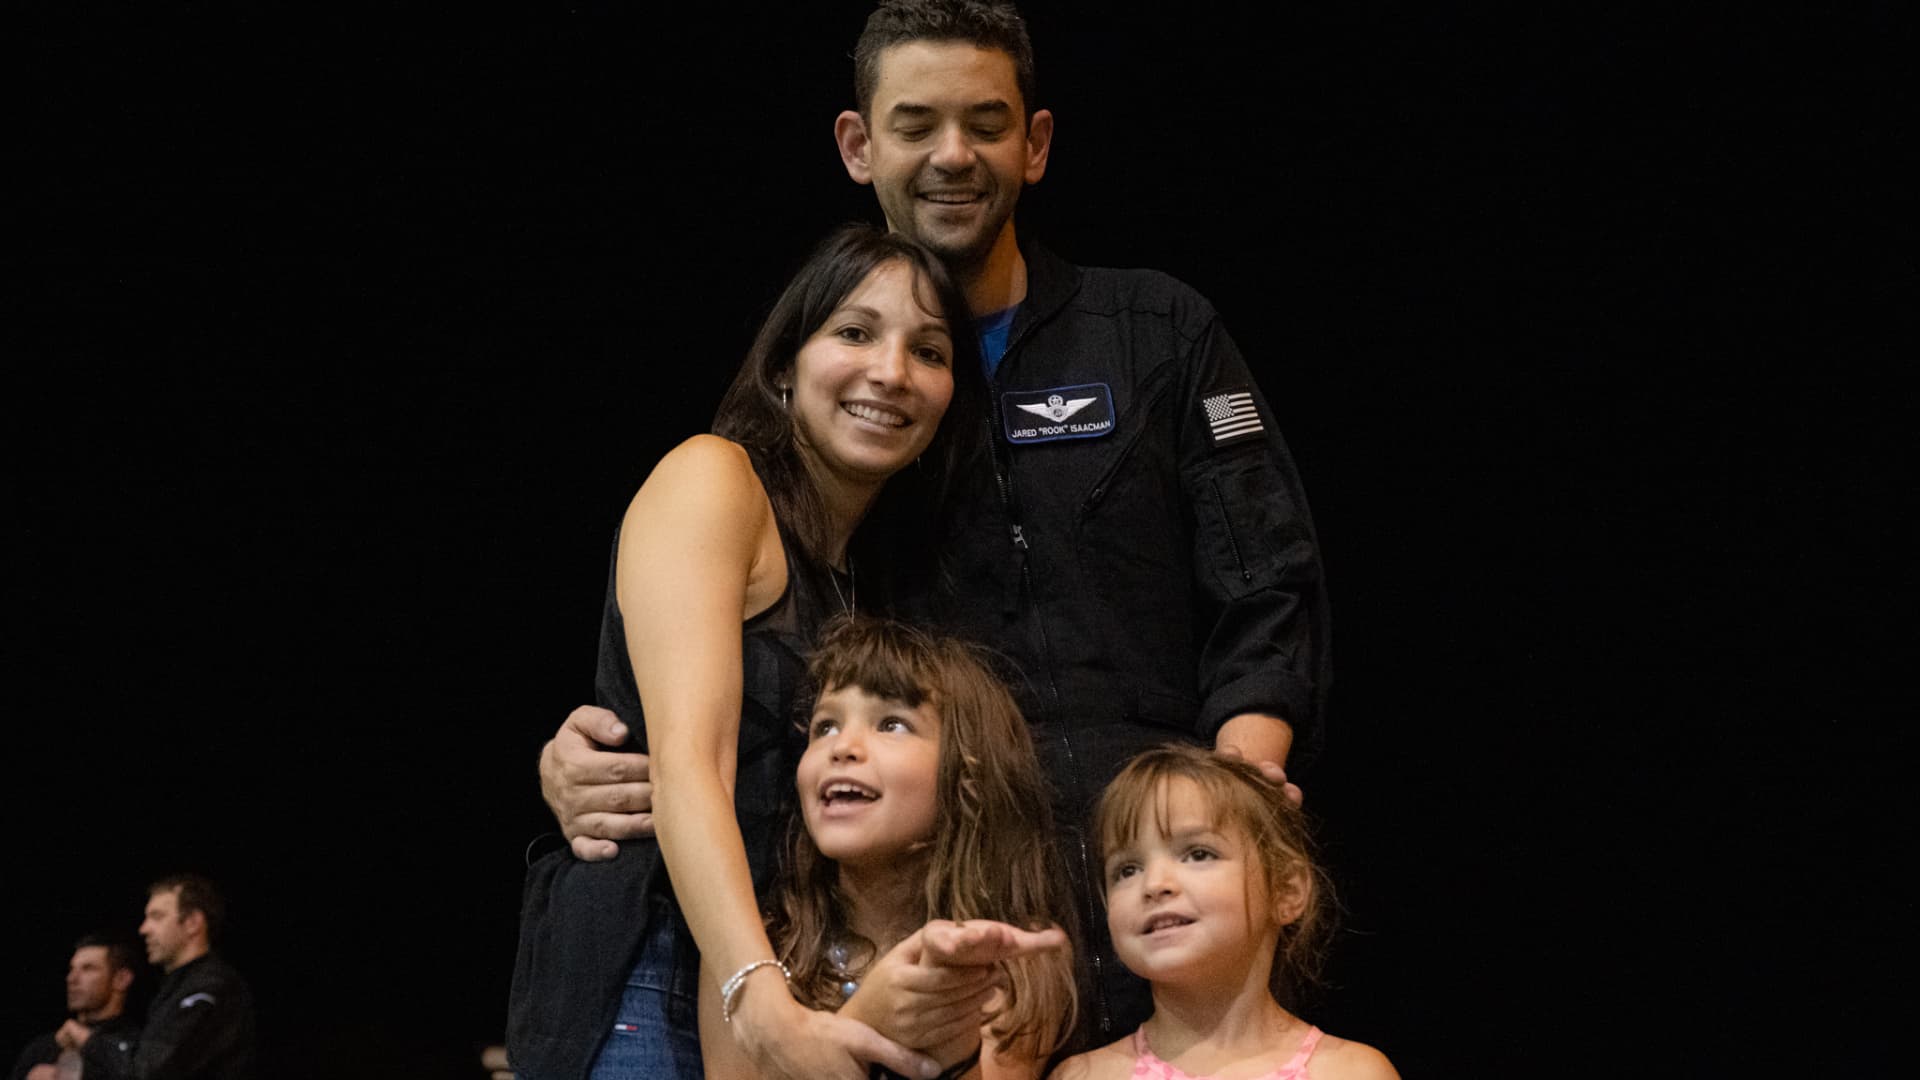 Isaacman reuniting with his wife, Monica, and their two daughters after splashdown.